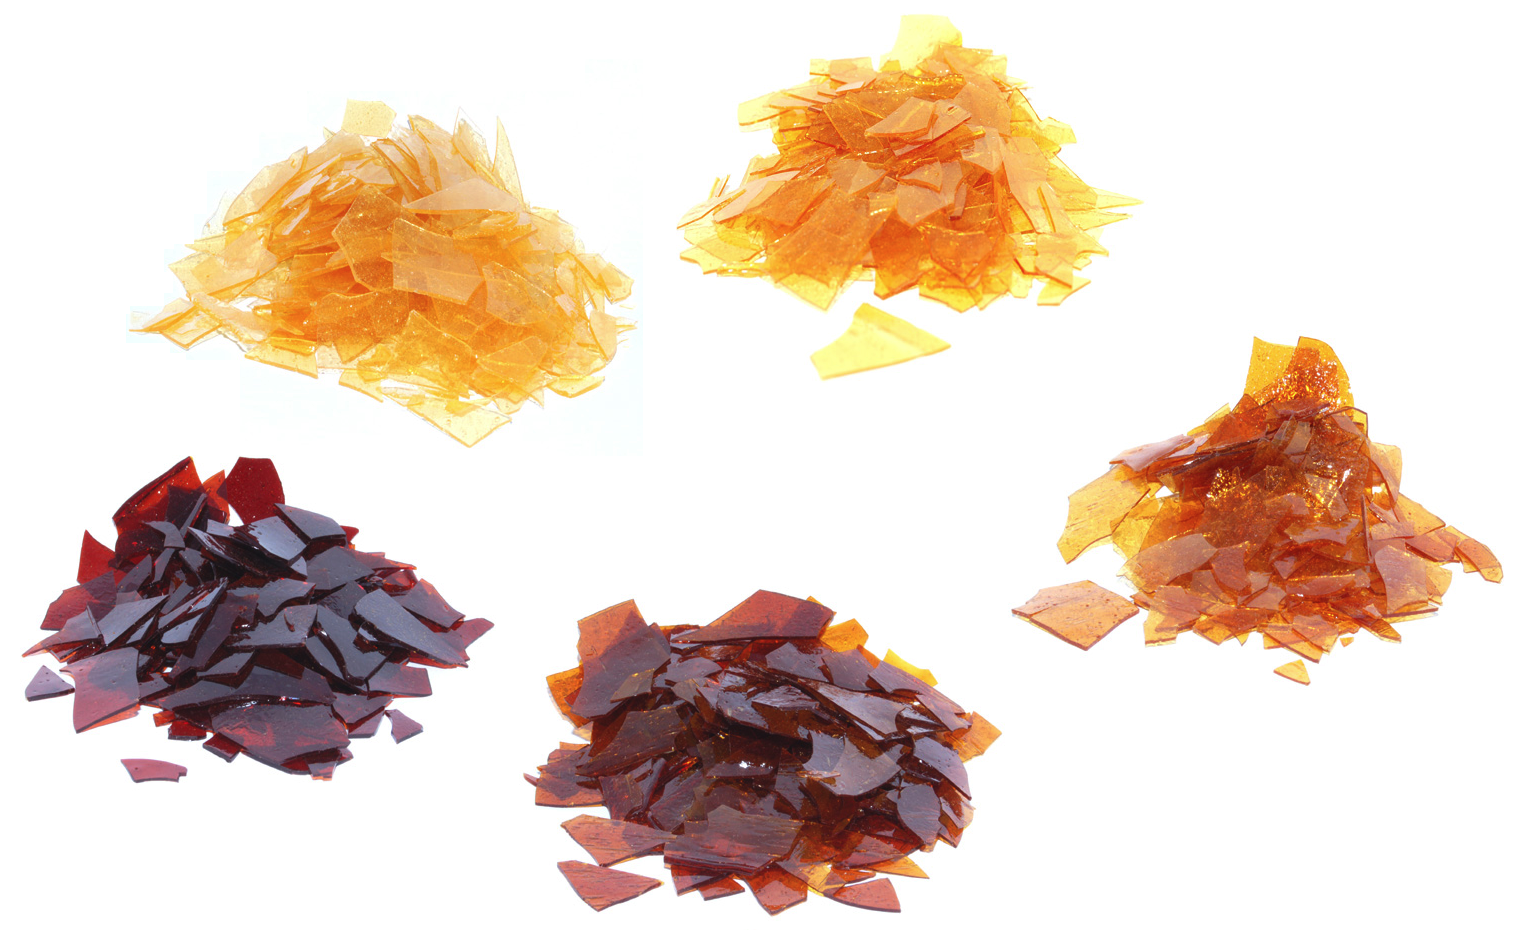 varieties of shellac used to make jelly beans.